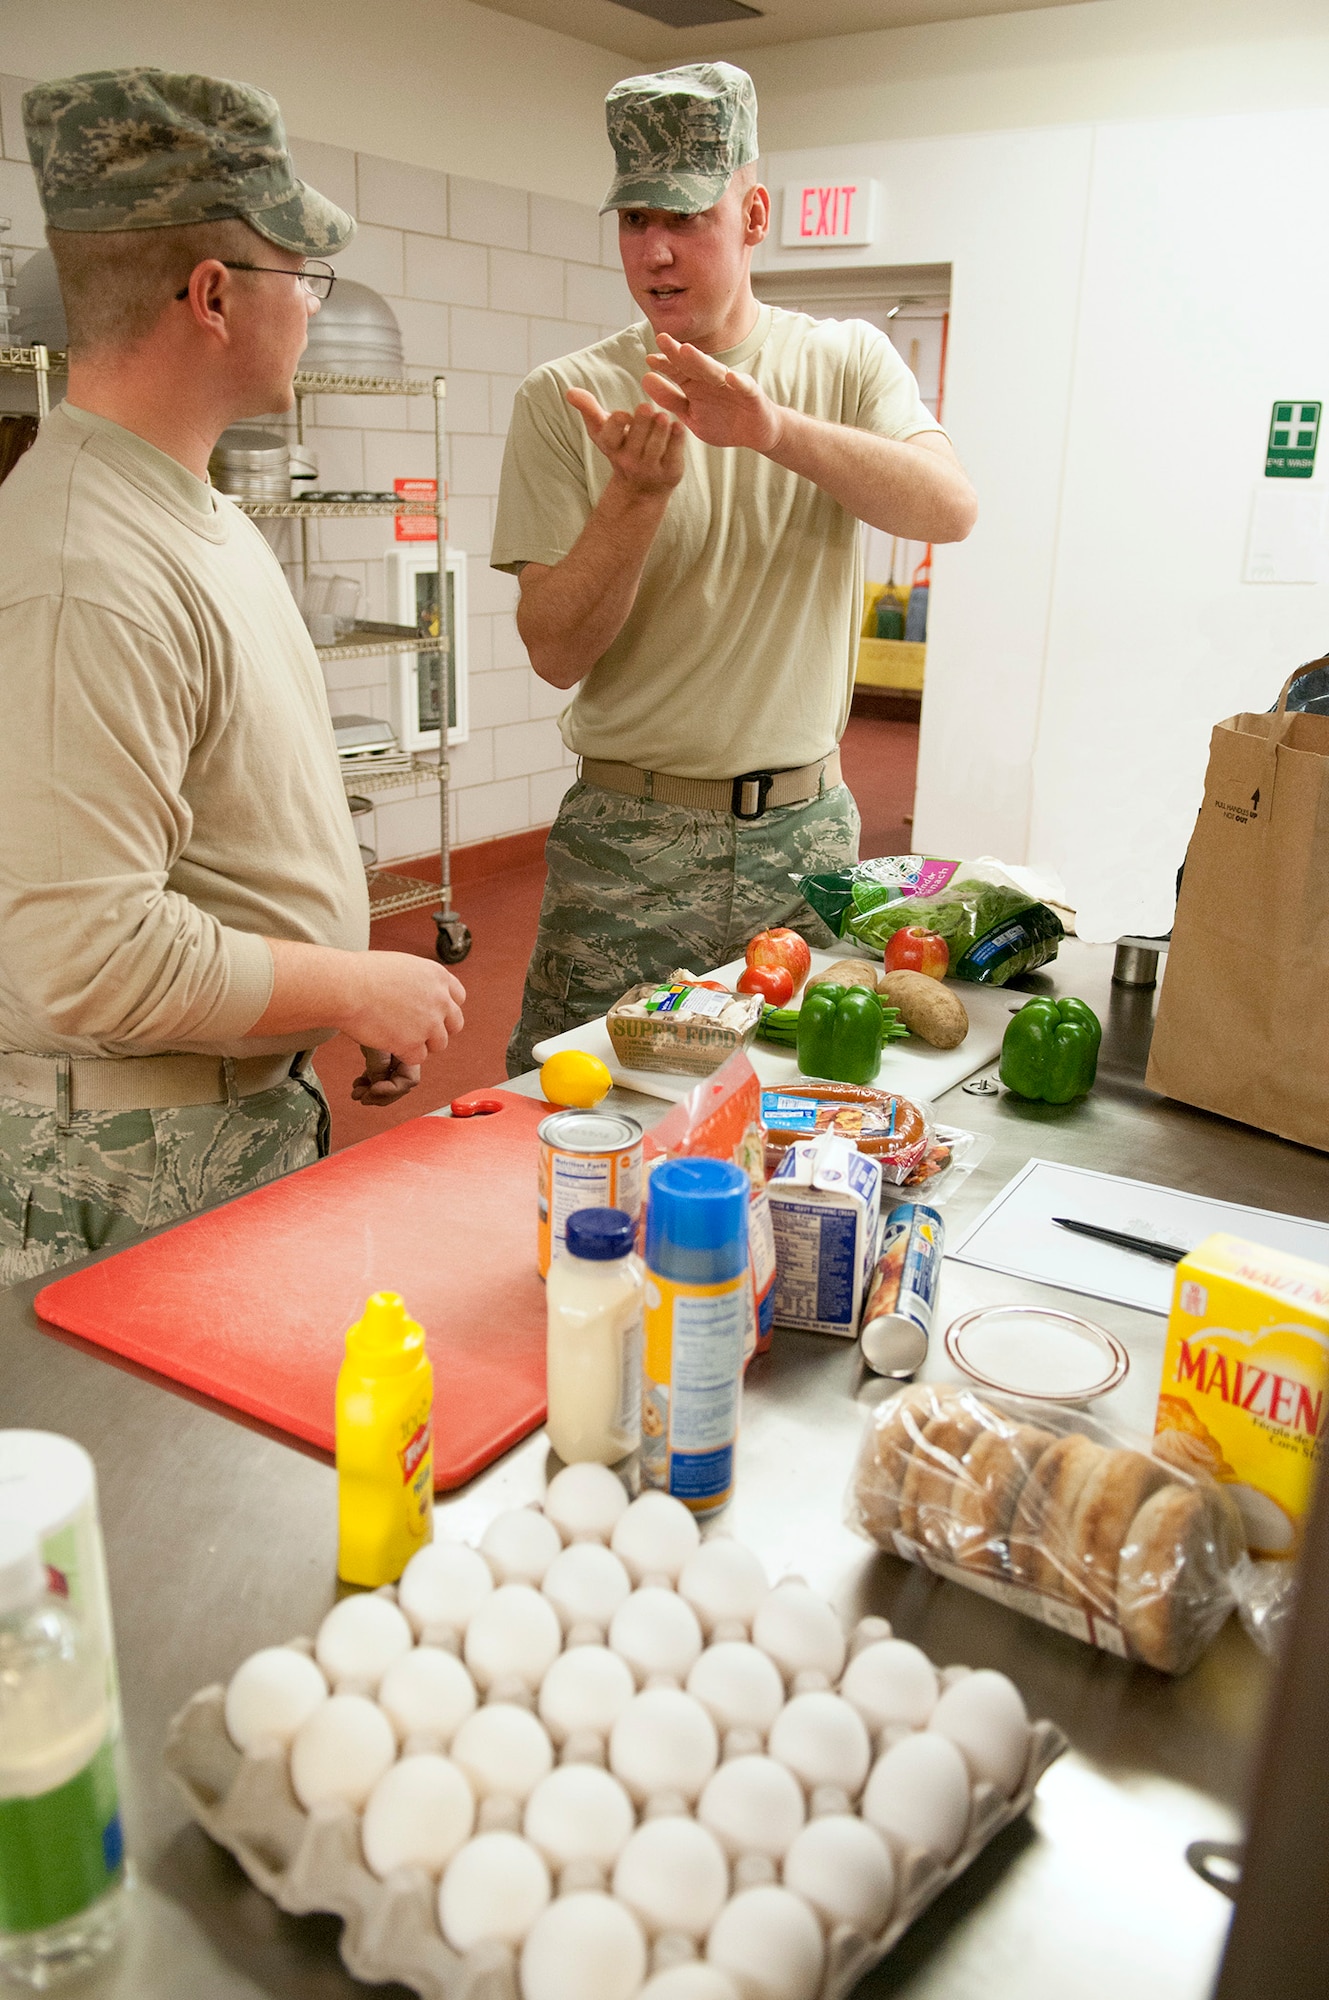 Tech. Sgts. Steven Vatsaas, right, and Michael McGrath, 12th Missile Squadron facility managers, plan the meal they will prepare from the groceries just revealed to them Dec. 4 during the Fourth Quarter Warrior Chef Competition at the Elkhorn Dining Facility. In a change from previous Warrior Chef competitions, two of the five competing teams were from outside of the Services career field. (U.S. Air Force photo/Tech. Sgt. Christina Perchine) 